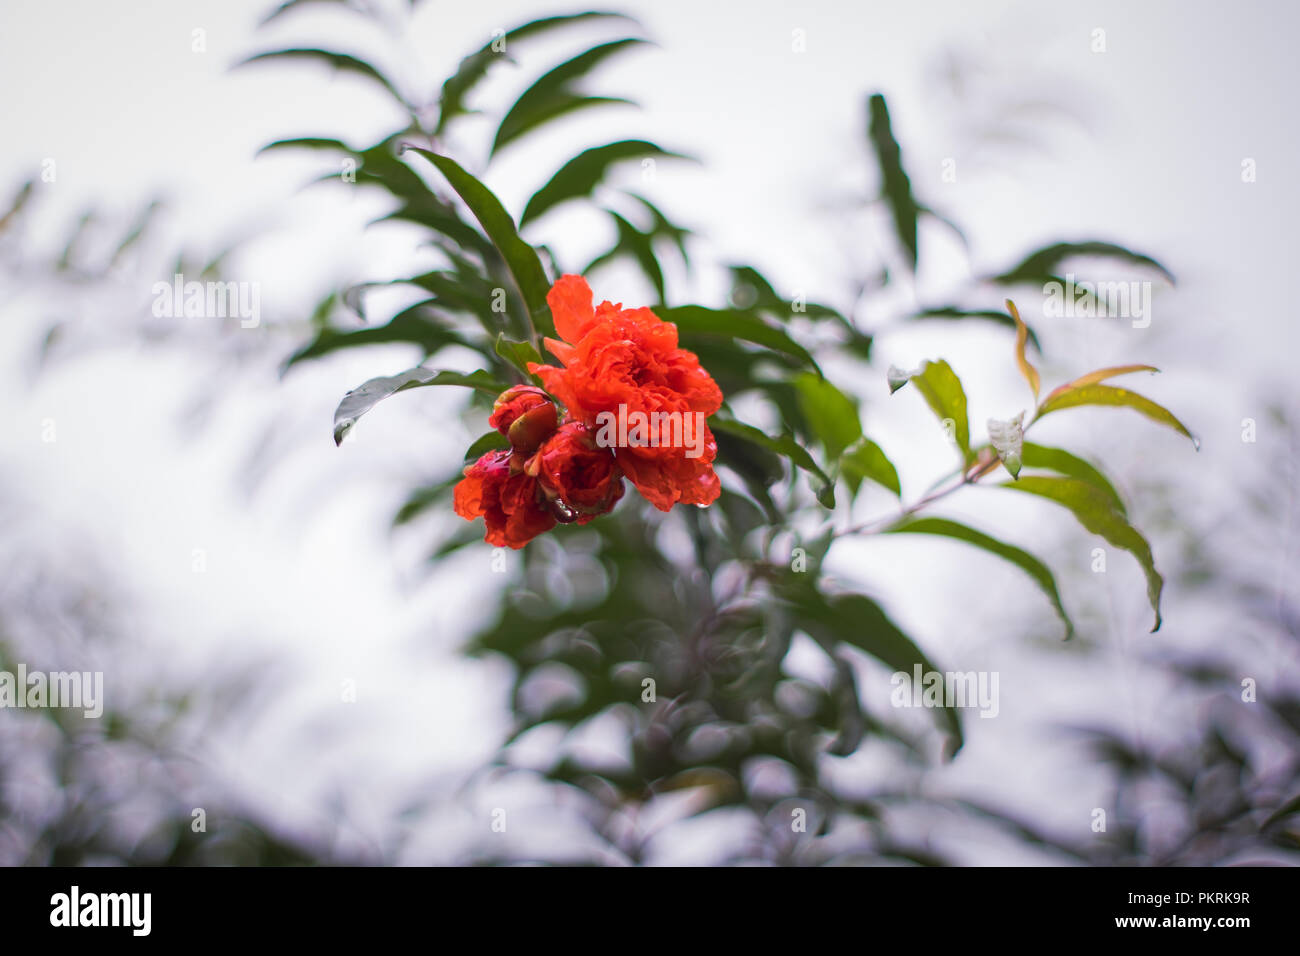 photograph of a red flower with a natural blurry background in the morning dew. Stock Photo